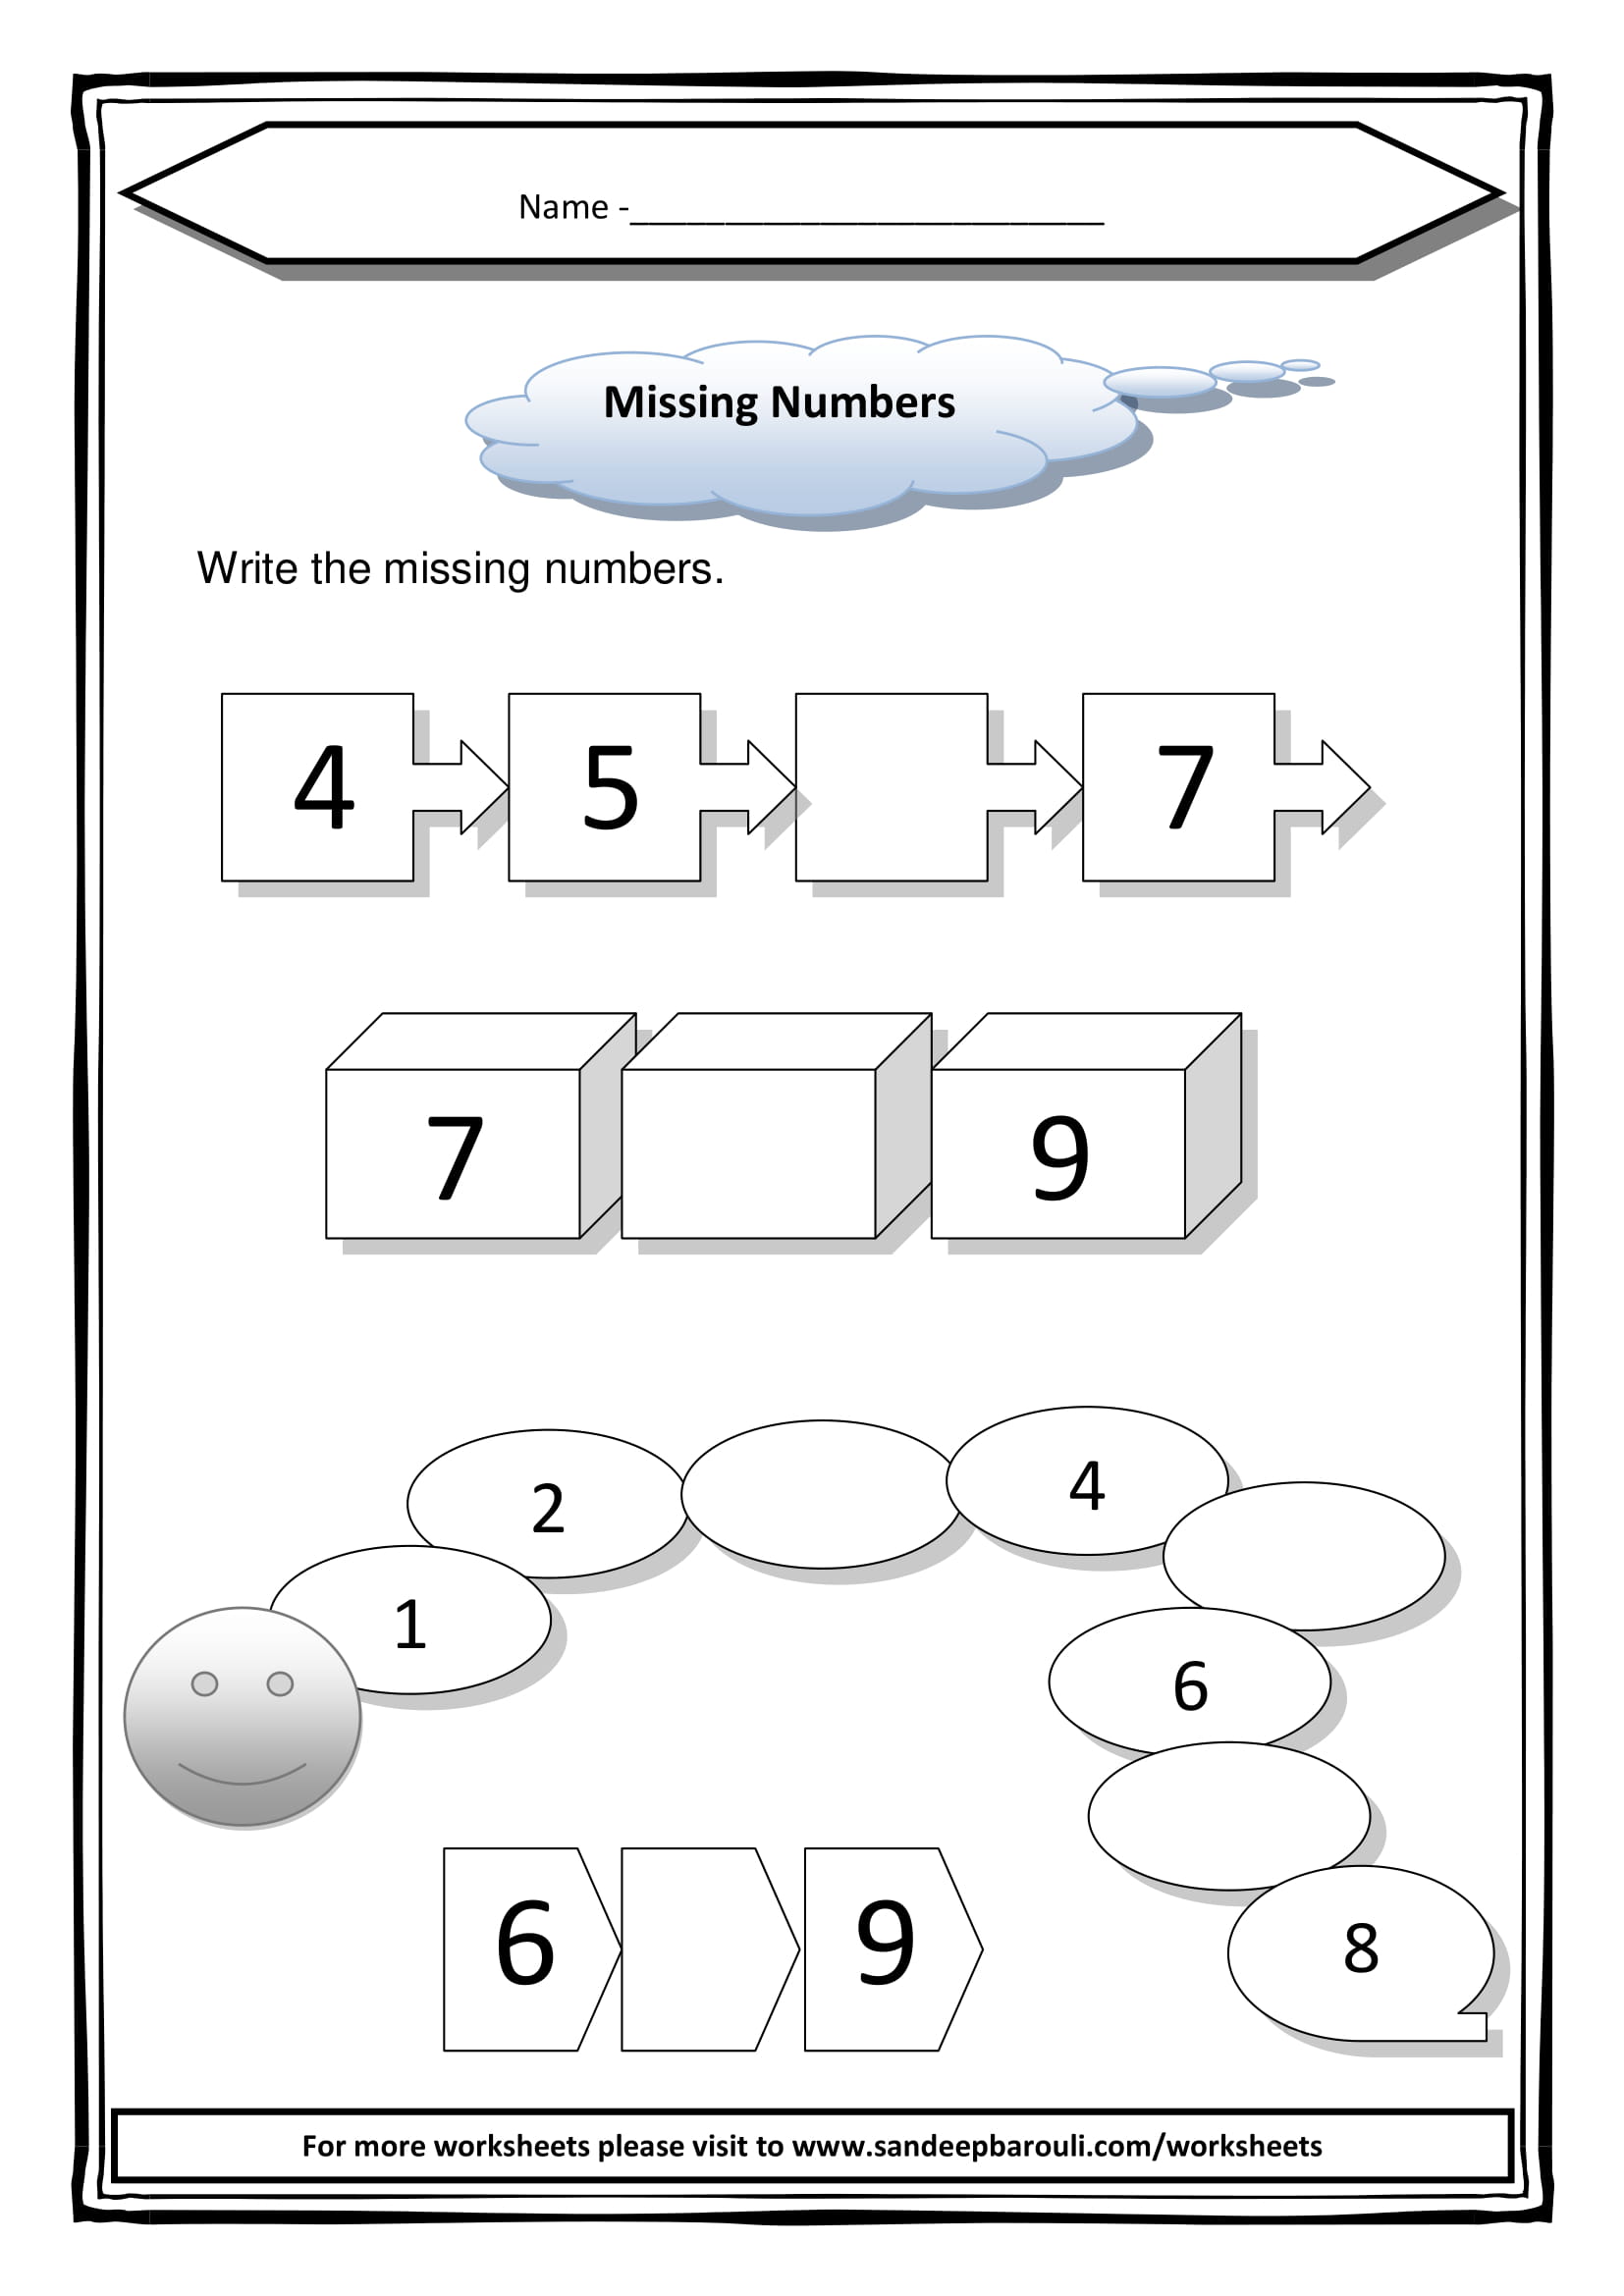 Missing-Numbers-Worksheet-for-class-1